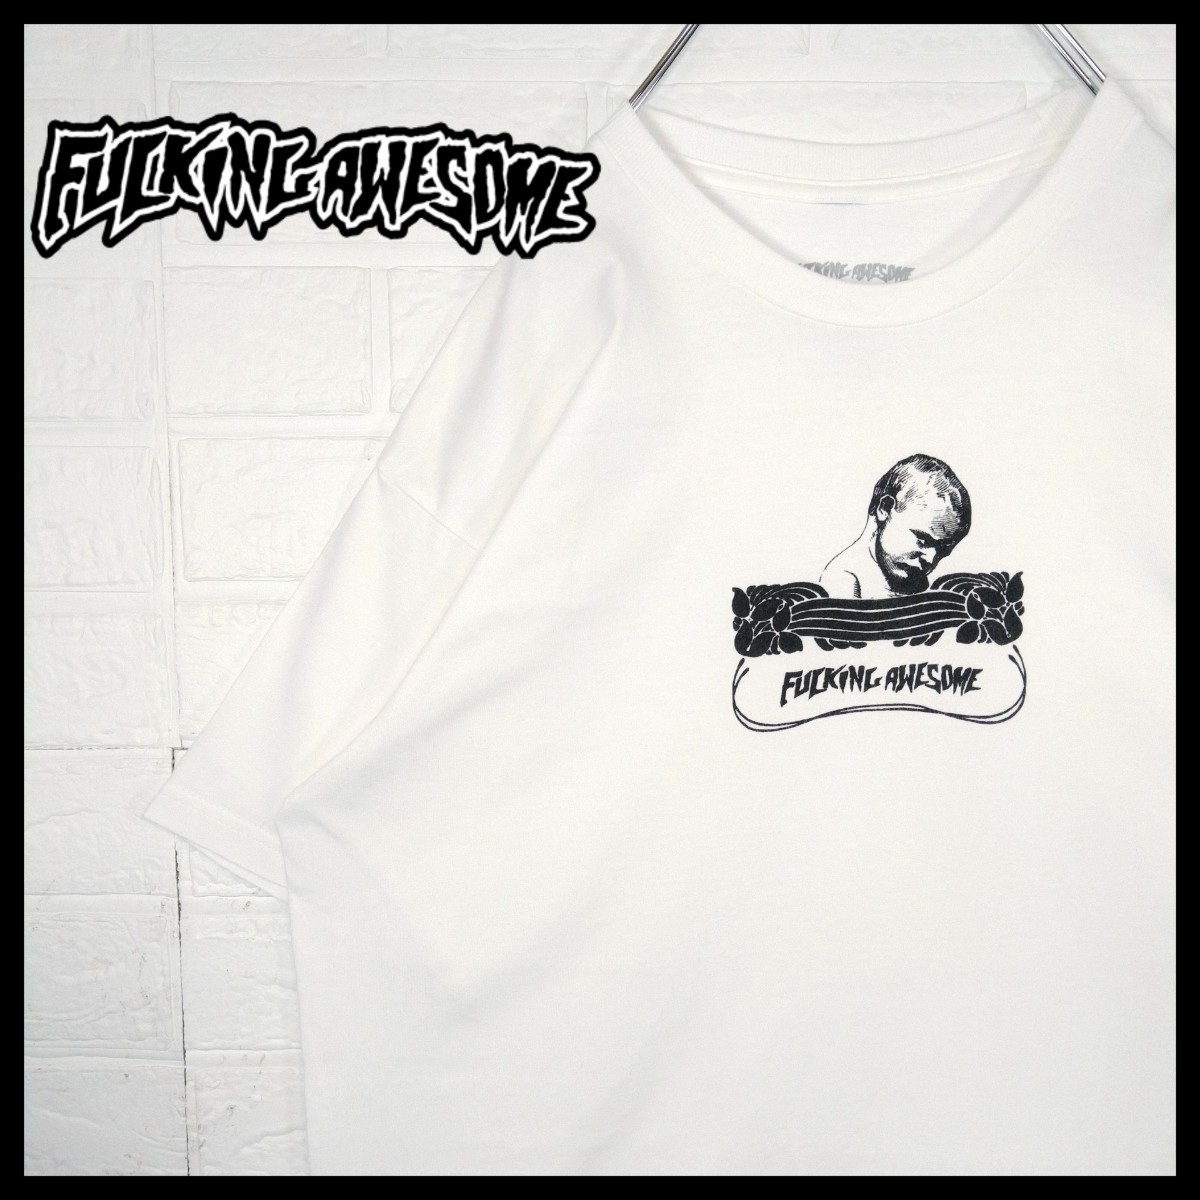 【FUCKING AWESOME】キッズロゴ　Tシャツ